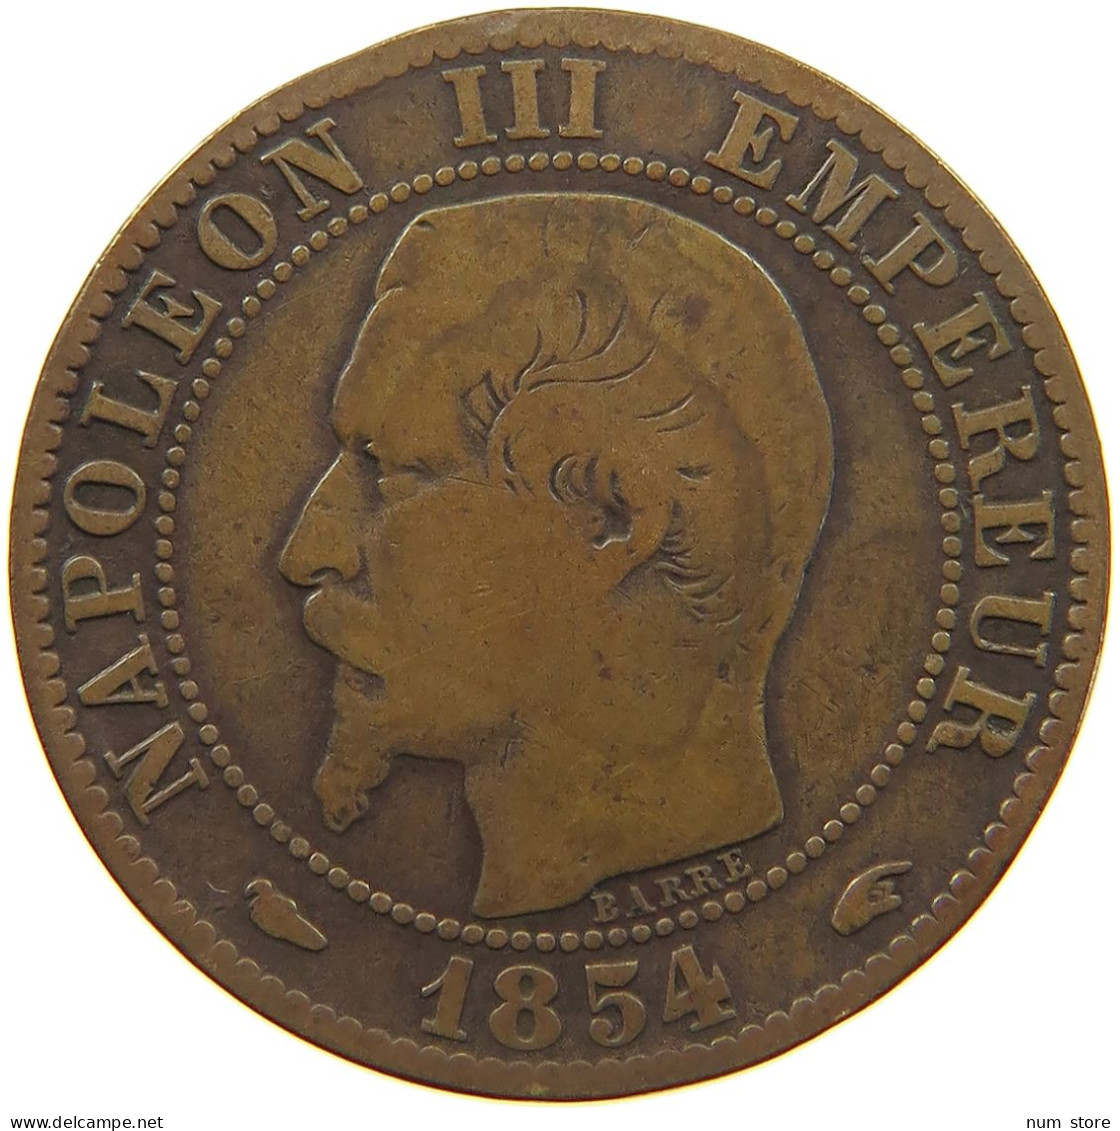 FRANCE 5 CENTIMES 1854 A Napoleon III. (1852-1870) #a059 0219 - 5 Centimes